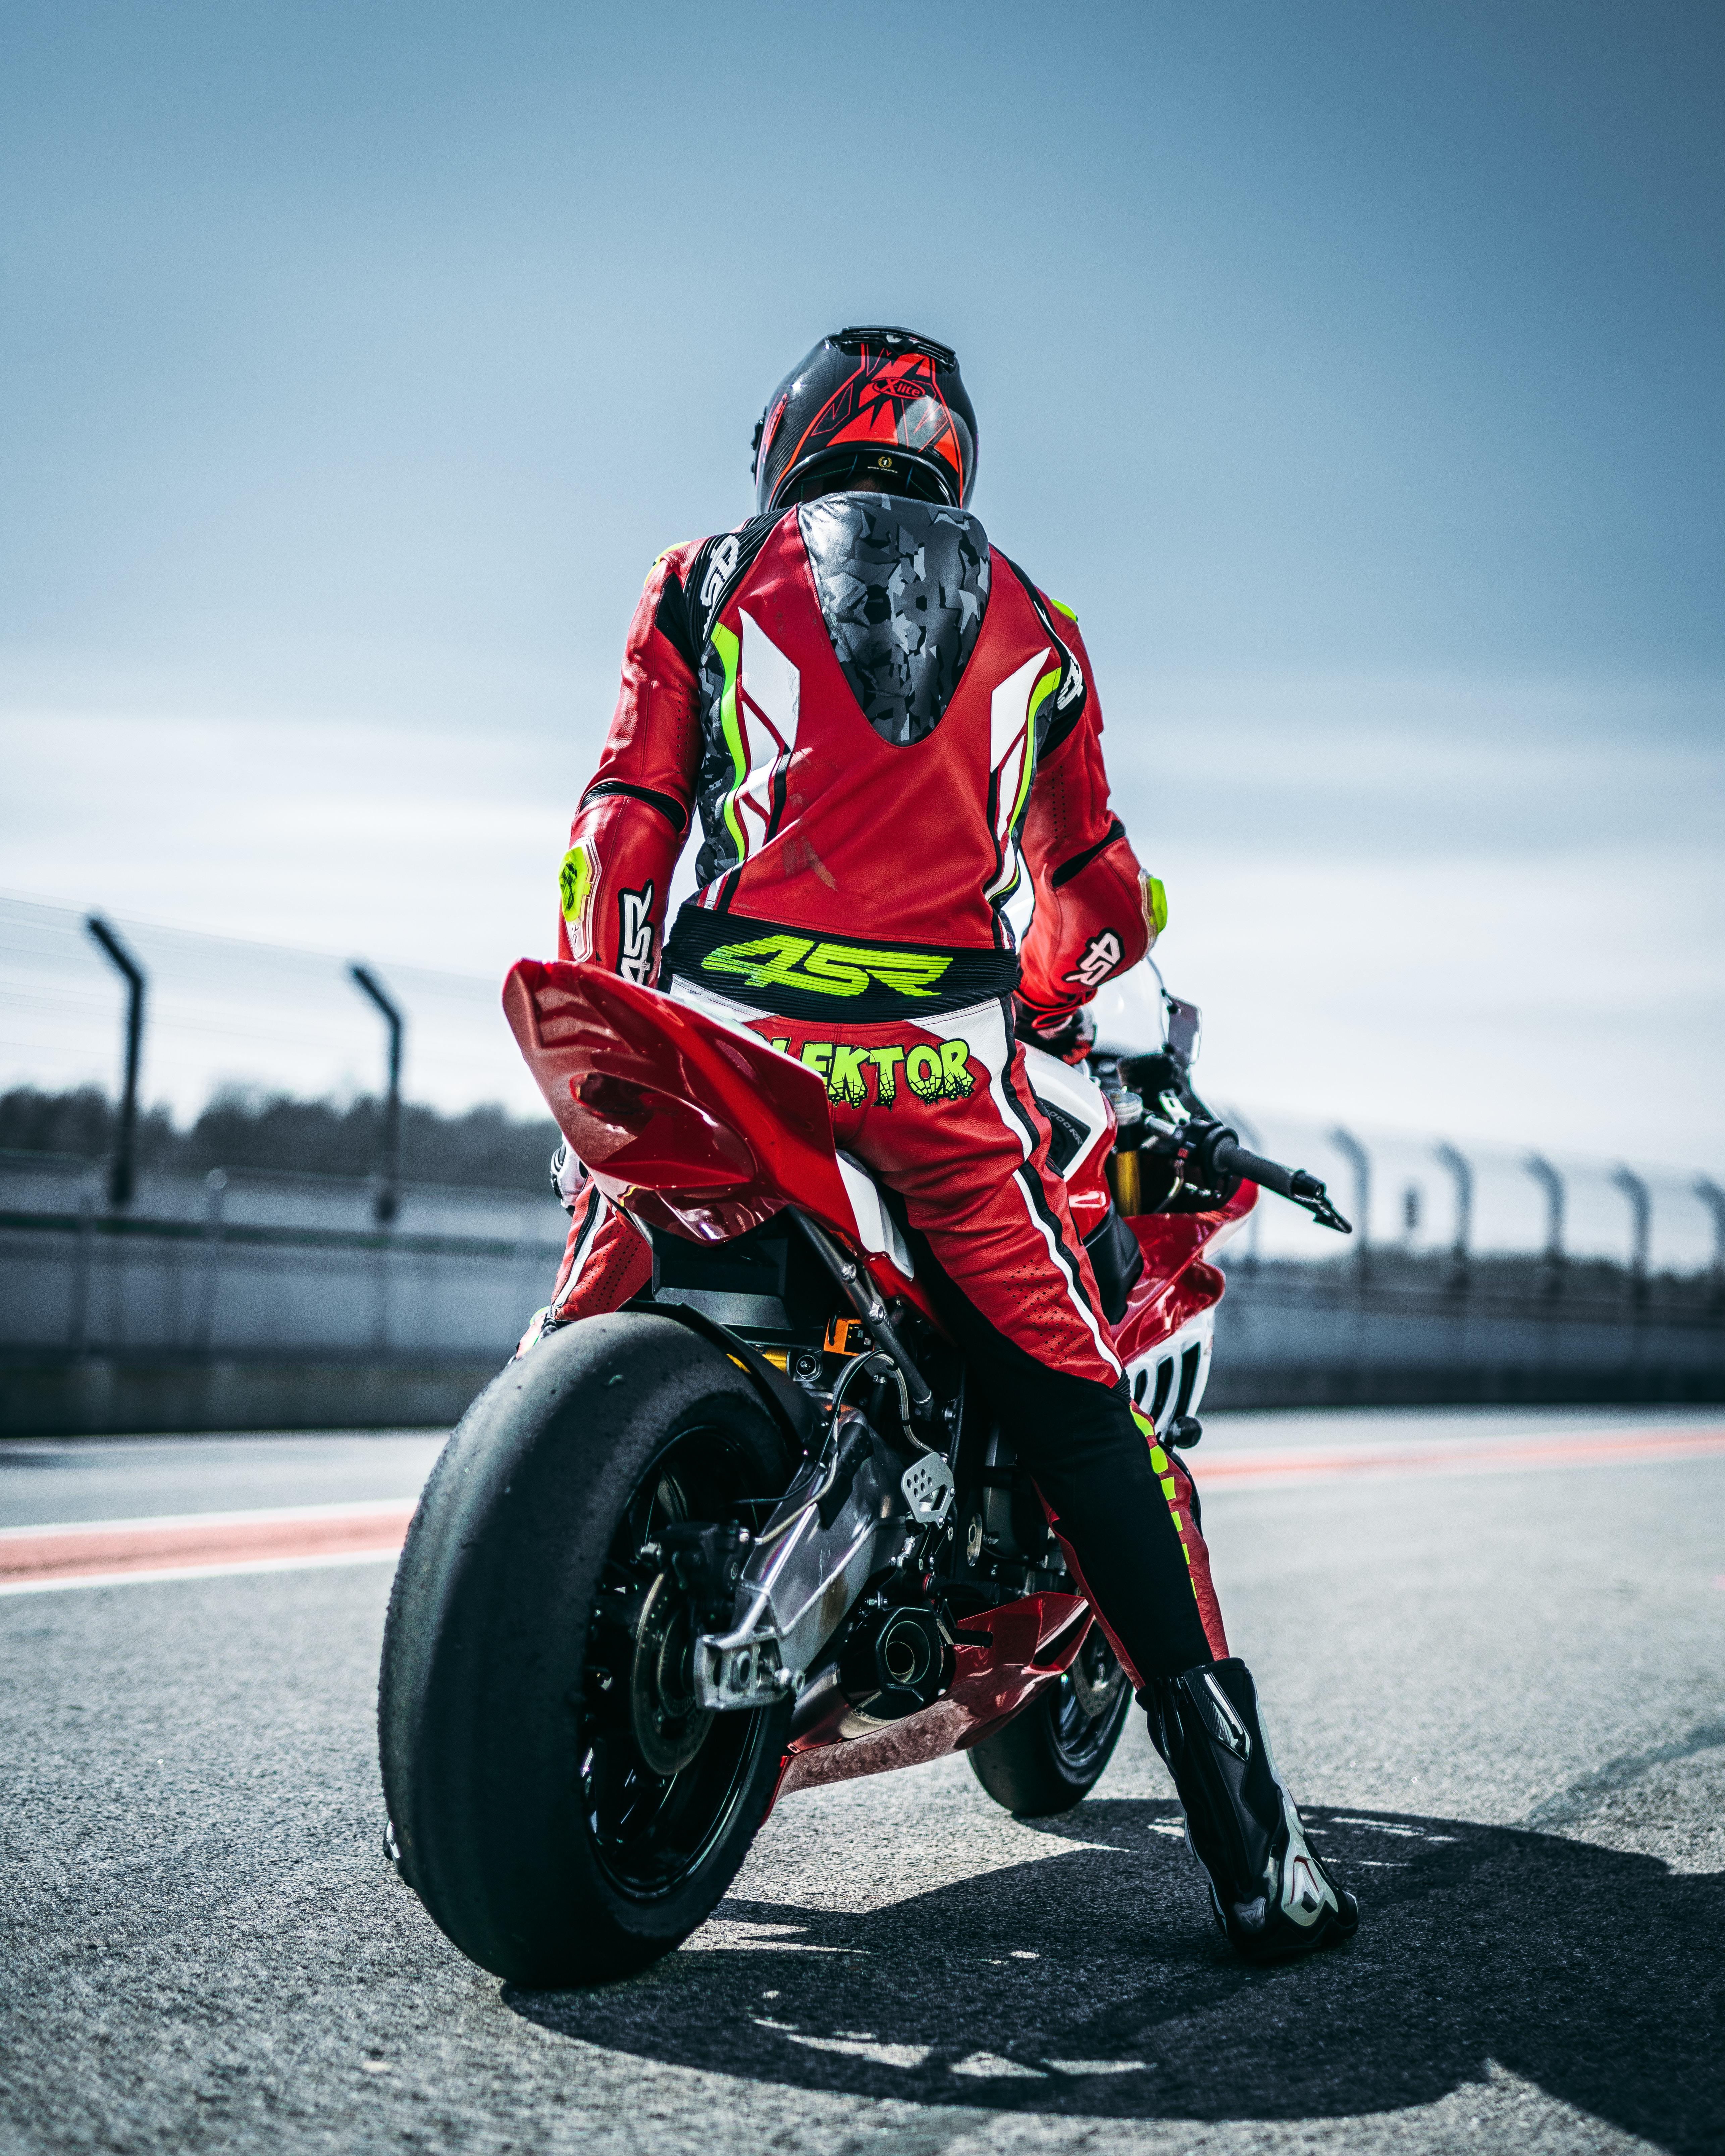 races, motorcyclist, motorcycle, racer Square Wallpapers